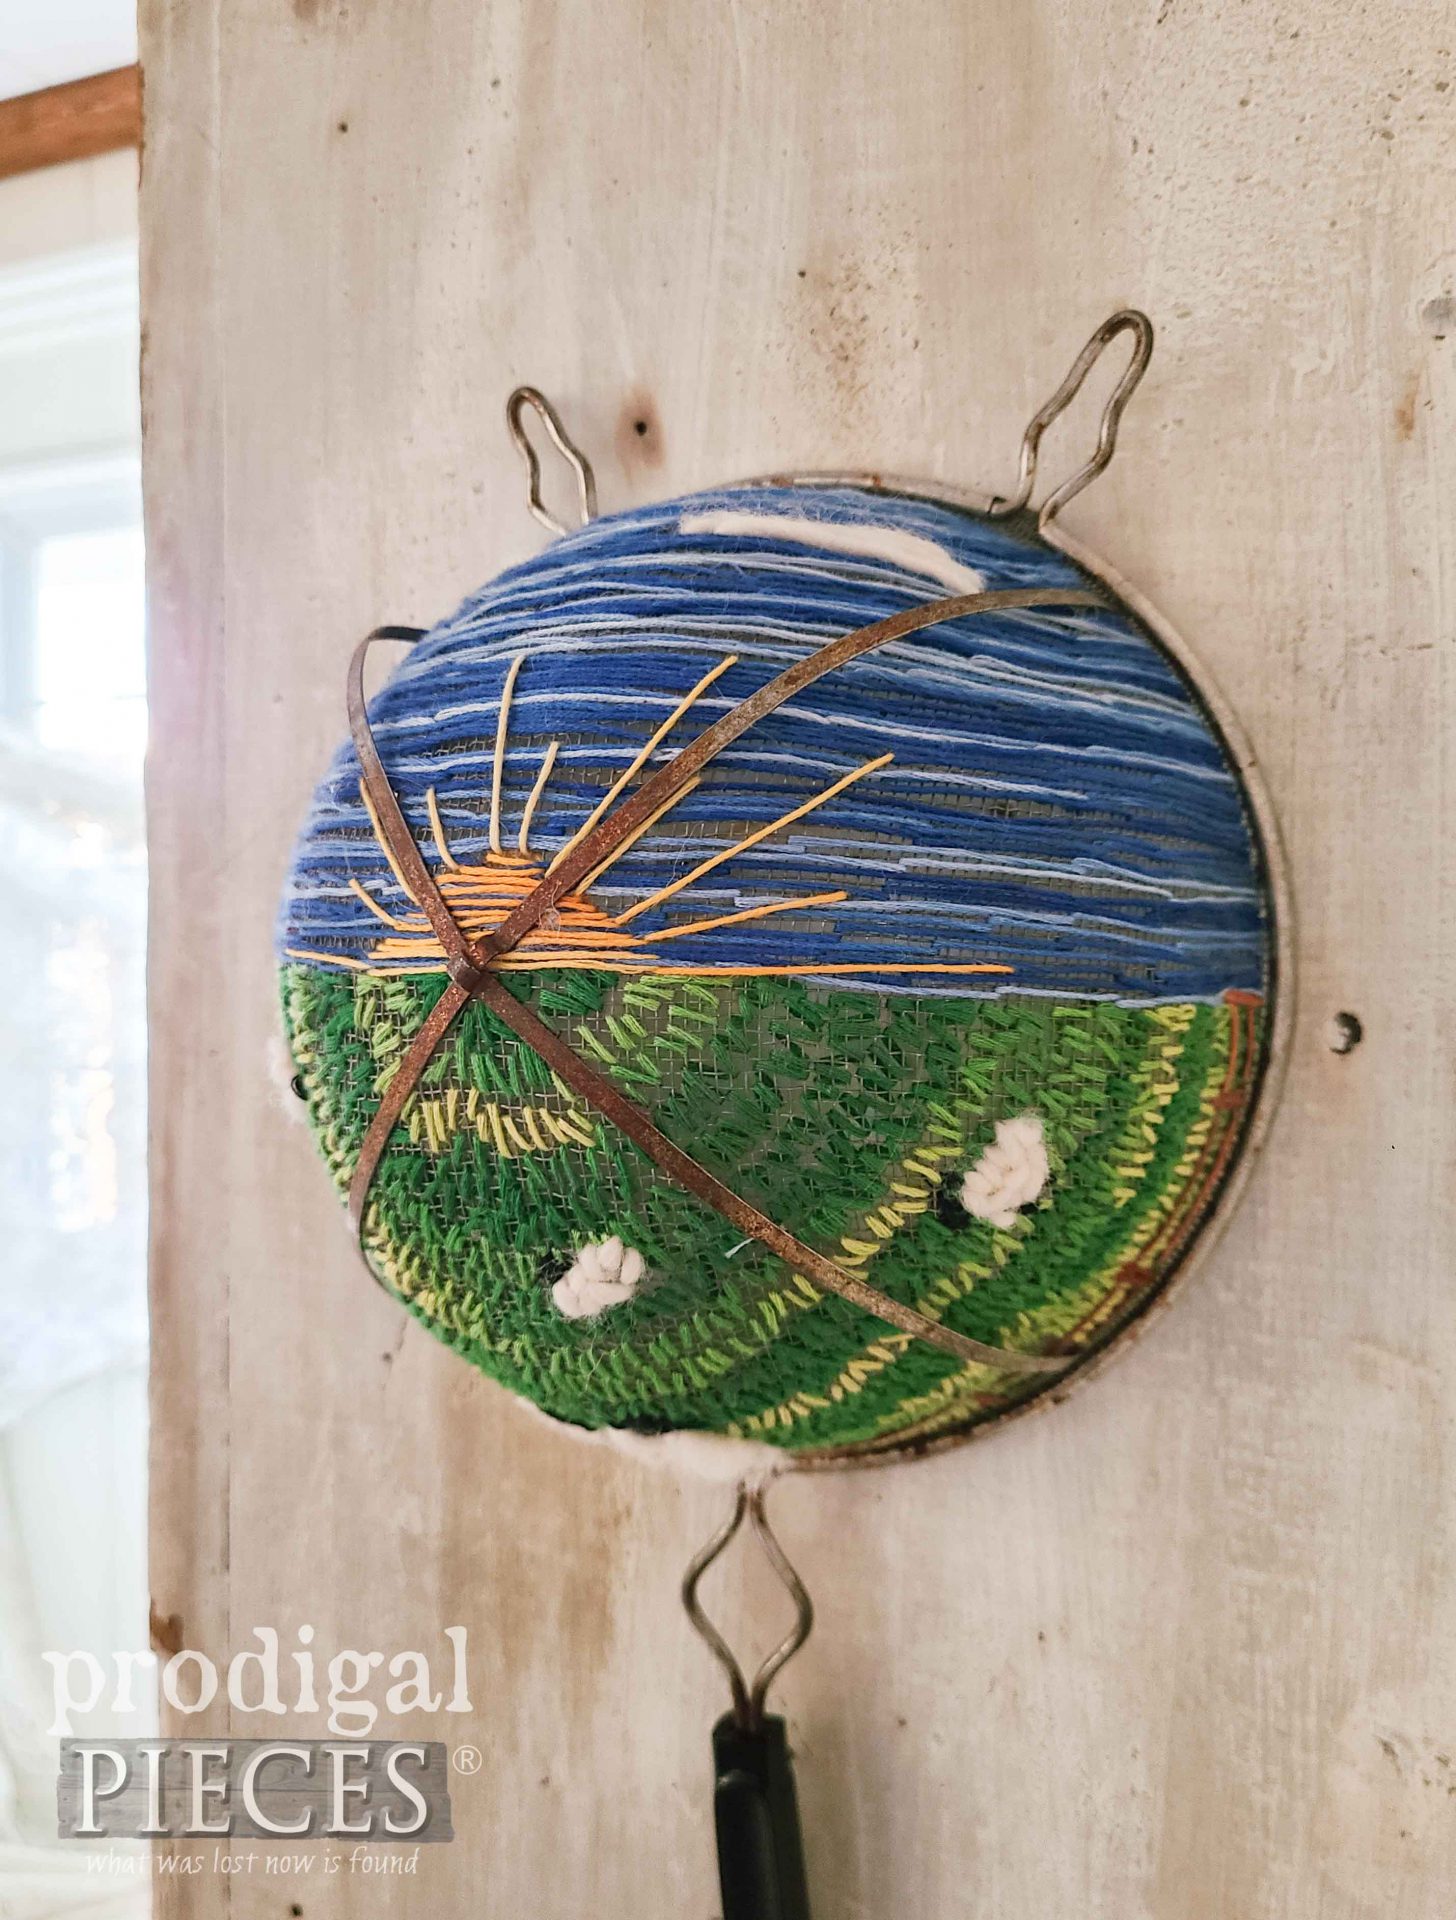 Rustic Farmhouse Embroidered Strainer Art "Focus on the Son" by Larissa of Prodigal Pieces | prodigalpieces.com #prodigalpieces #art #farmhouse